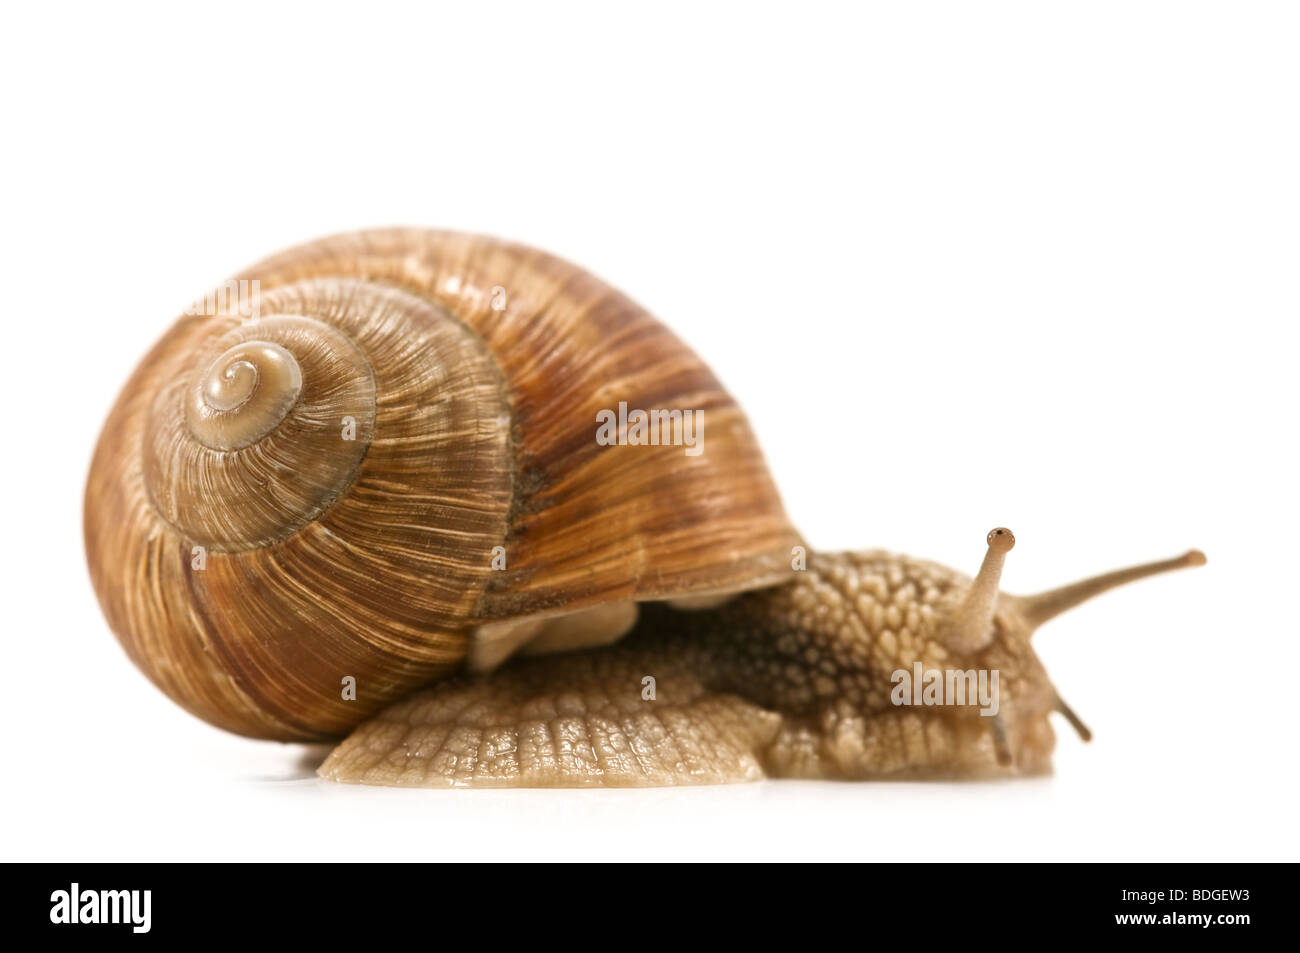 Snail isolated on white Banque D'Images